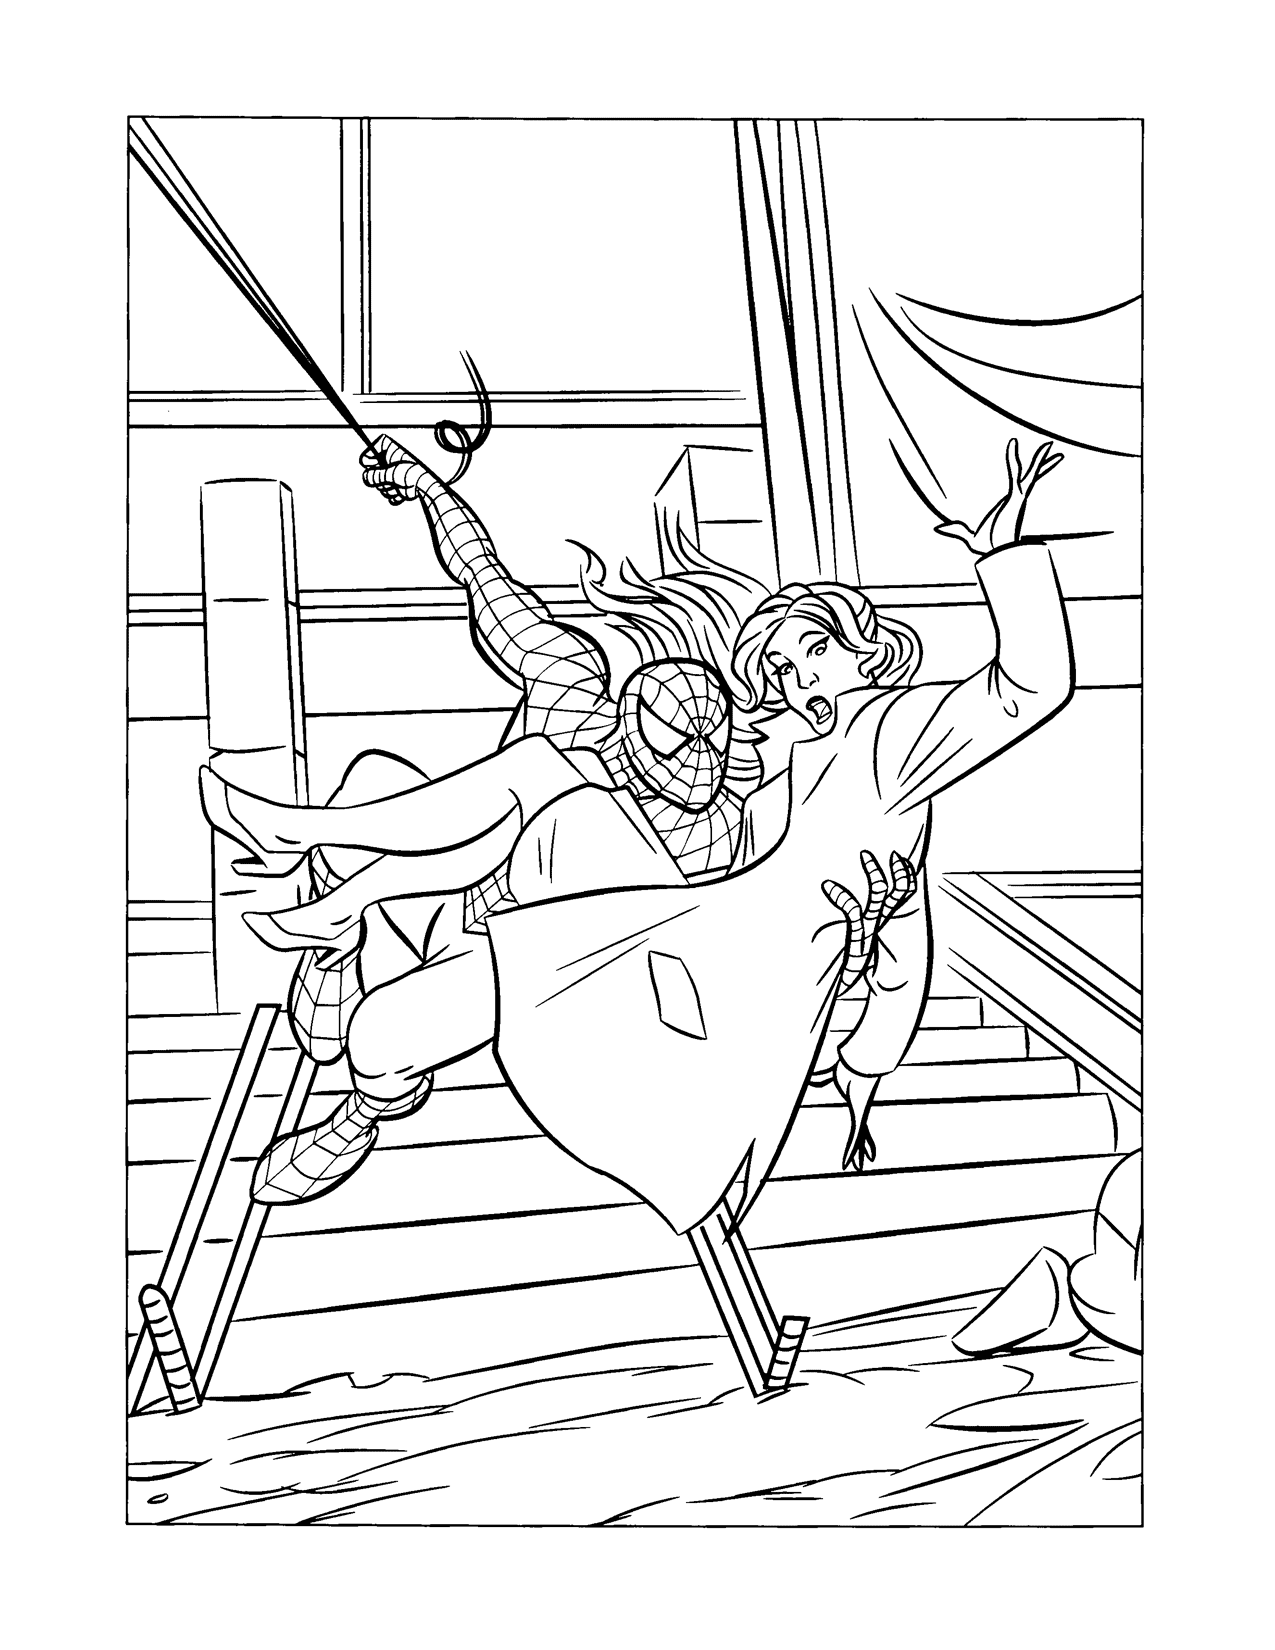 Spiderman Saving Mary Jane Coloring Page